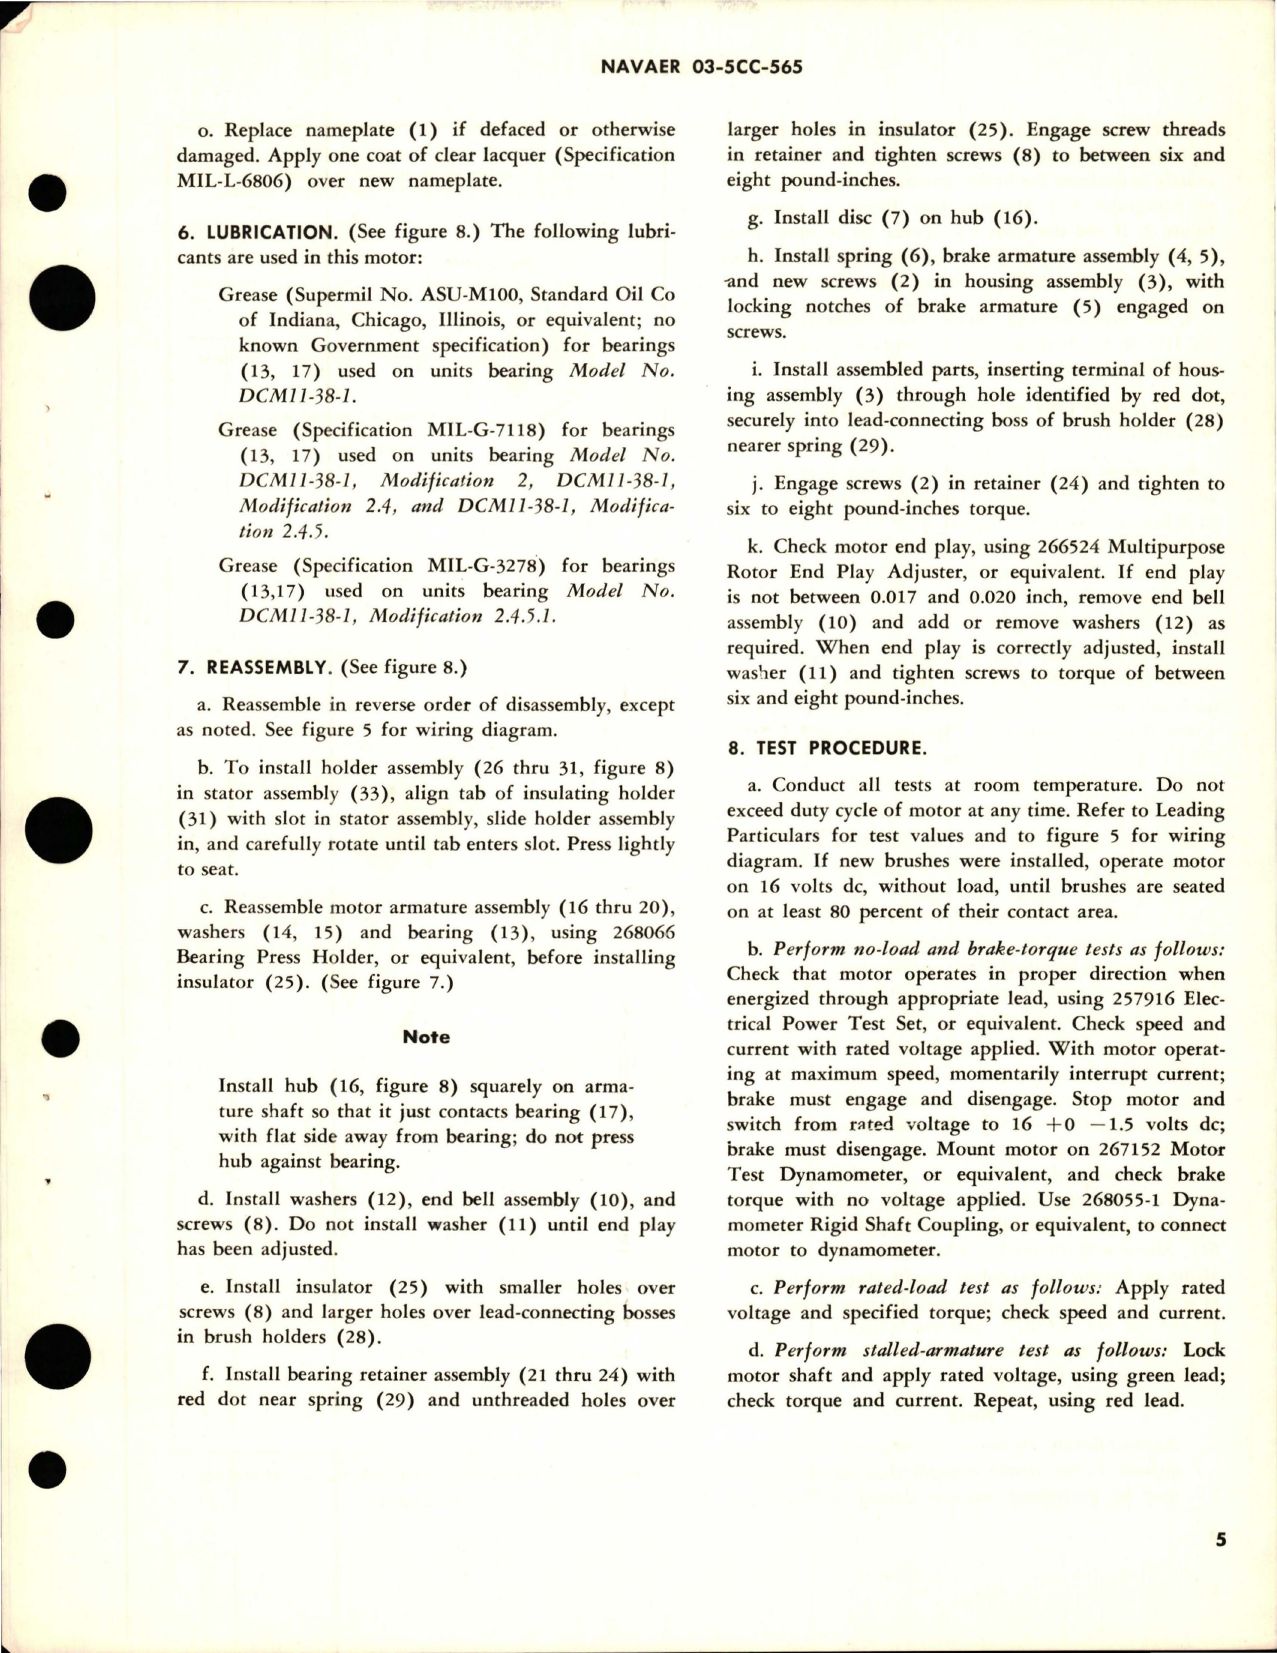 Sample page 5 from AirCorps Library document: Overhaul Instructions with Parts Breakdown for Direct-Current Motor - Part 36886 - Model DCM11-38-1 